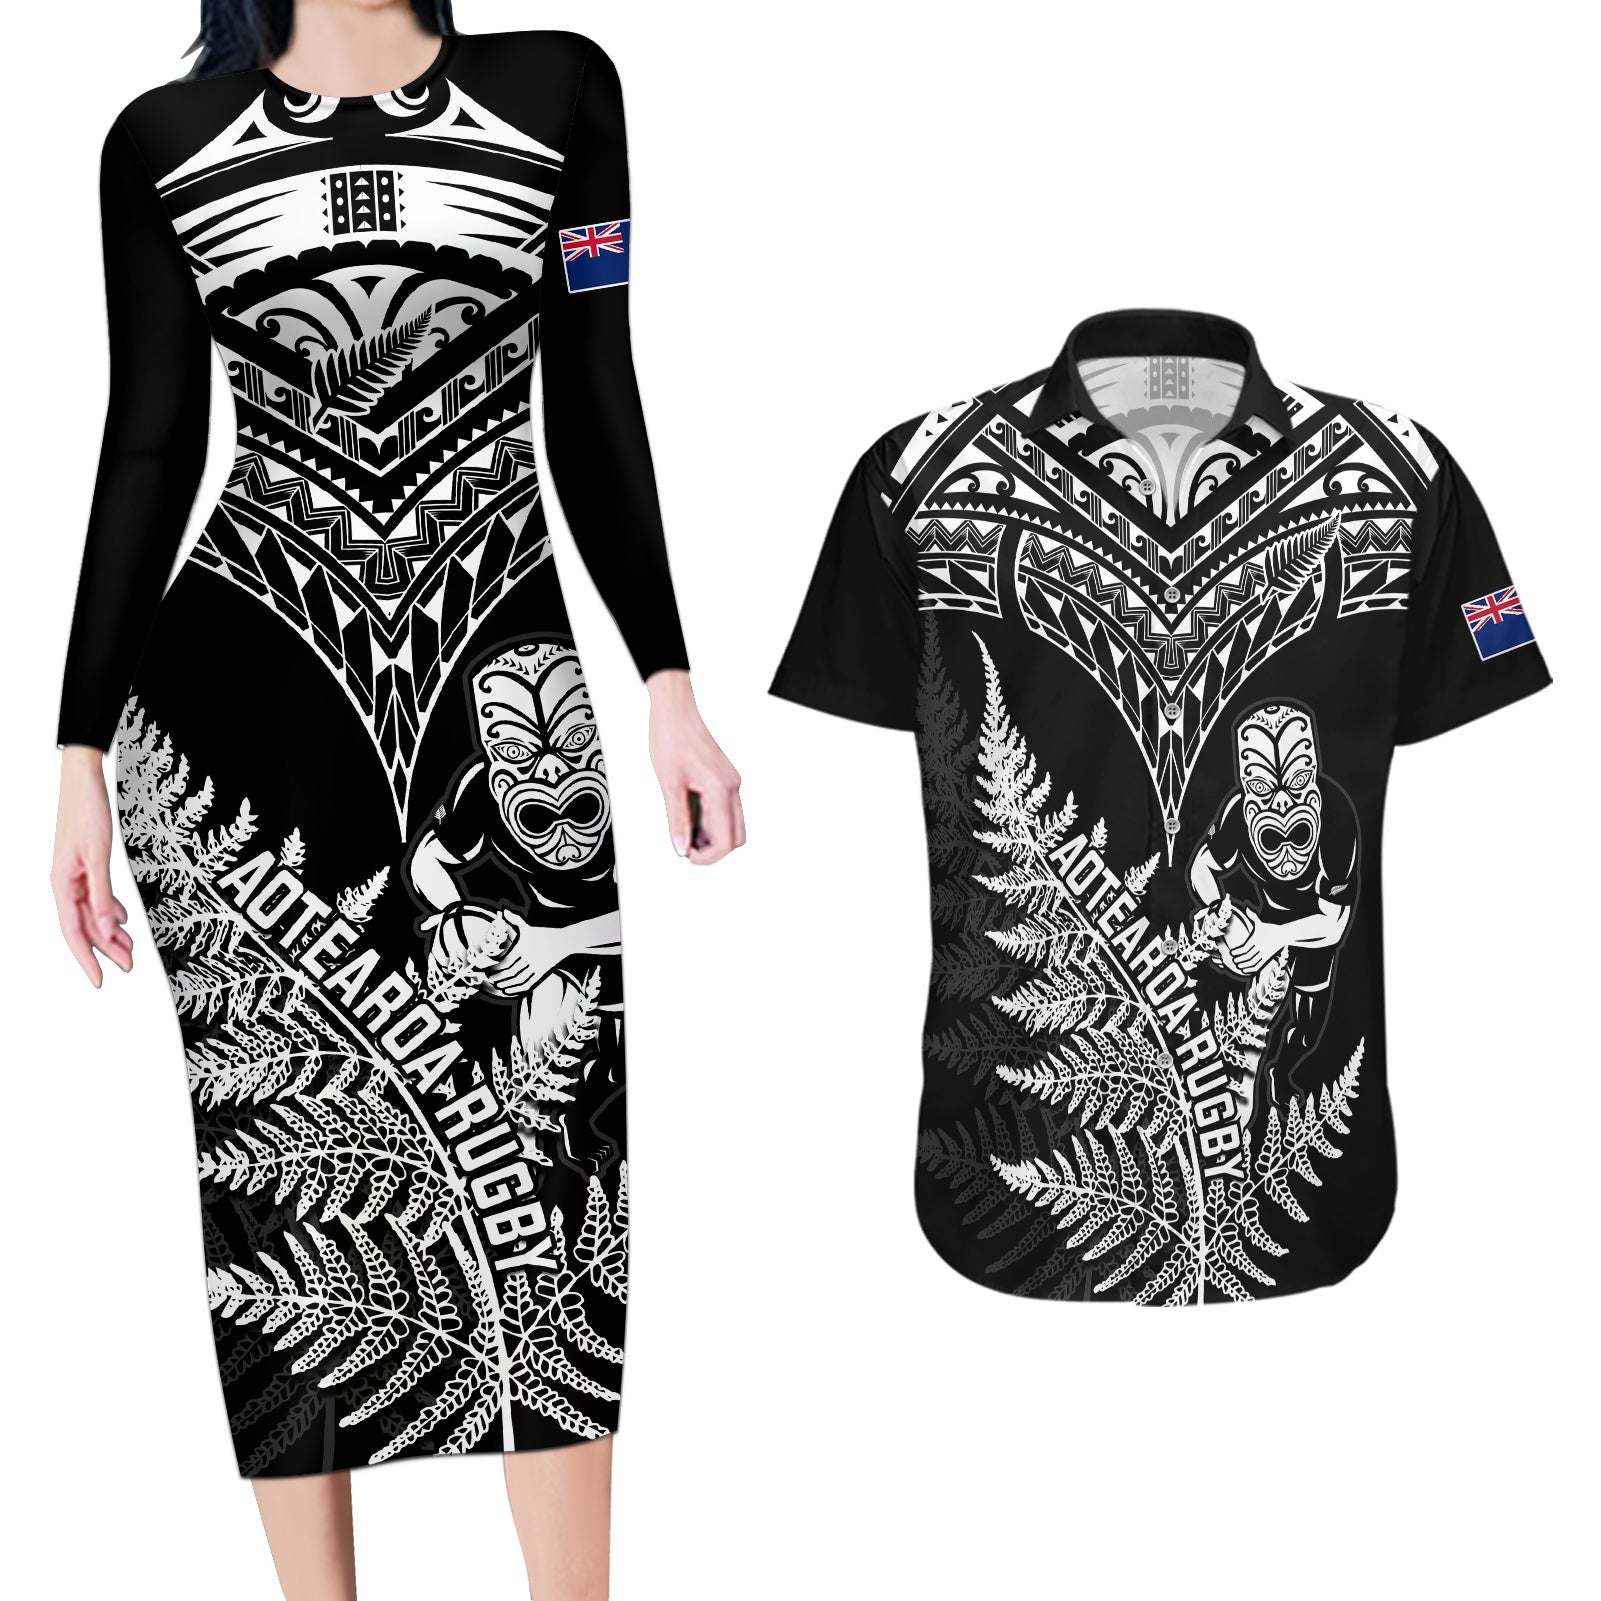 New Zealand Silver Fern Rugby Couples Matching Long Sleeve Bodycon Dress and Hawaiian Shirt Go All Black 2023 World Cup LT14 Black - Polynesian Pride